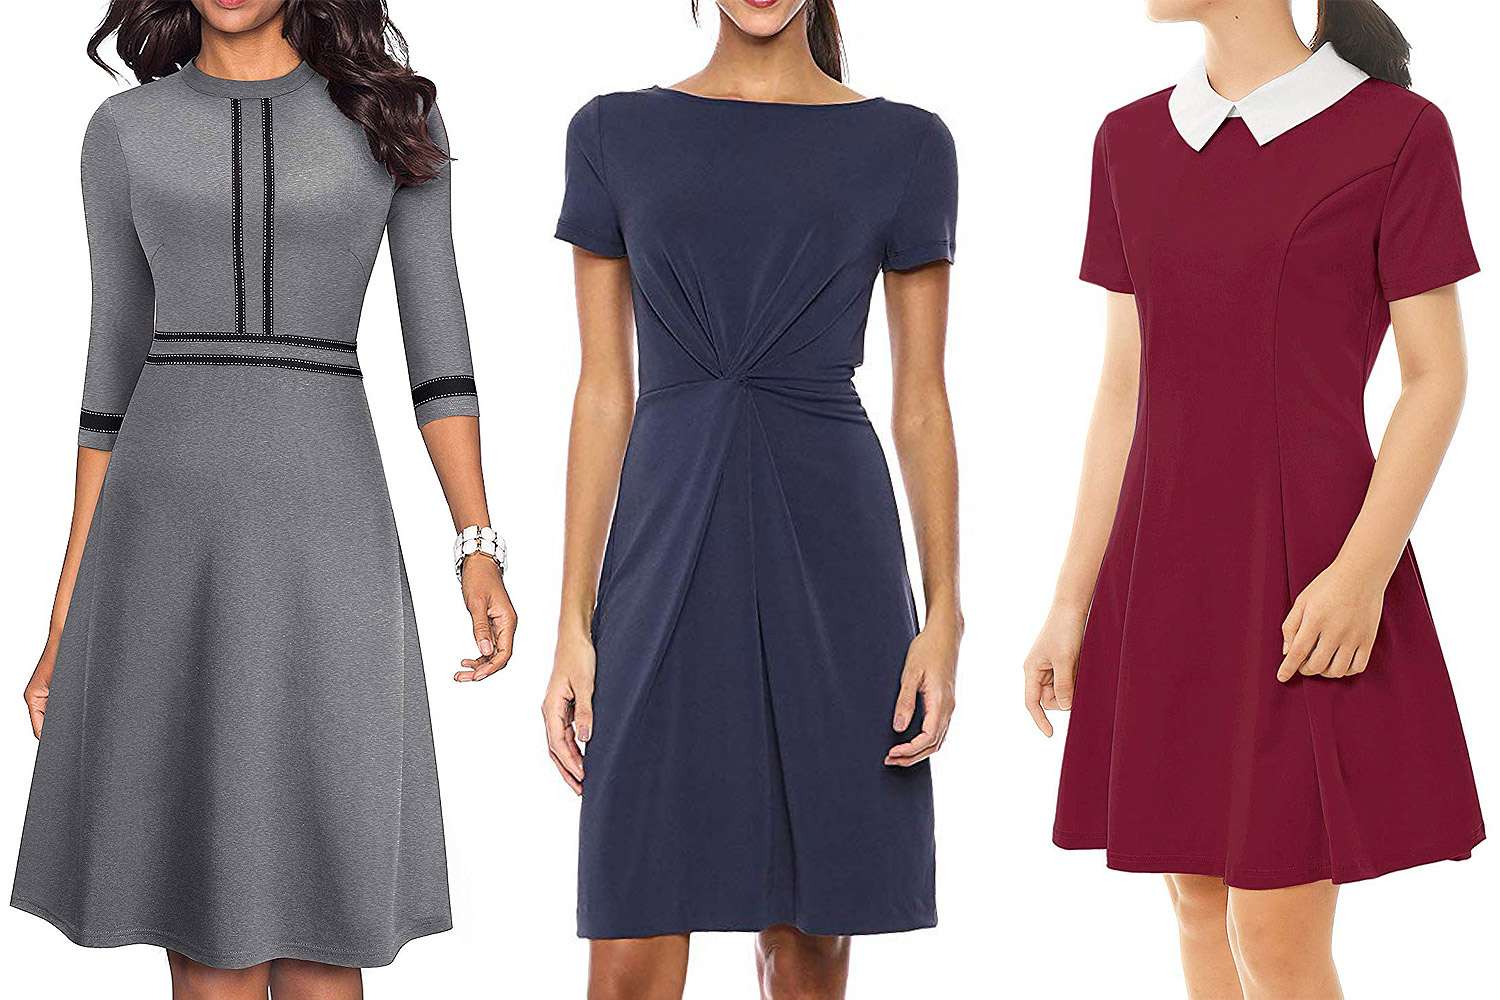 12 Work-Perfect Dresses on Amazon for 